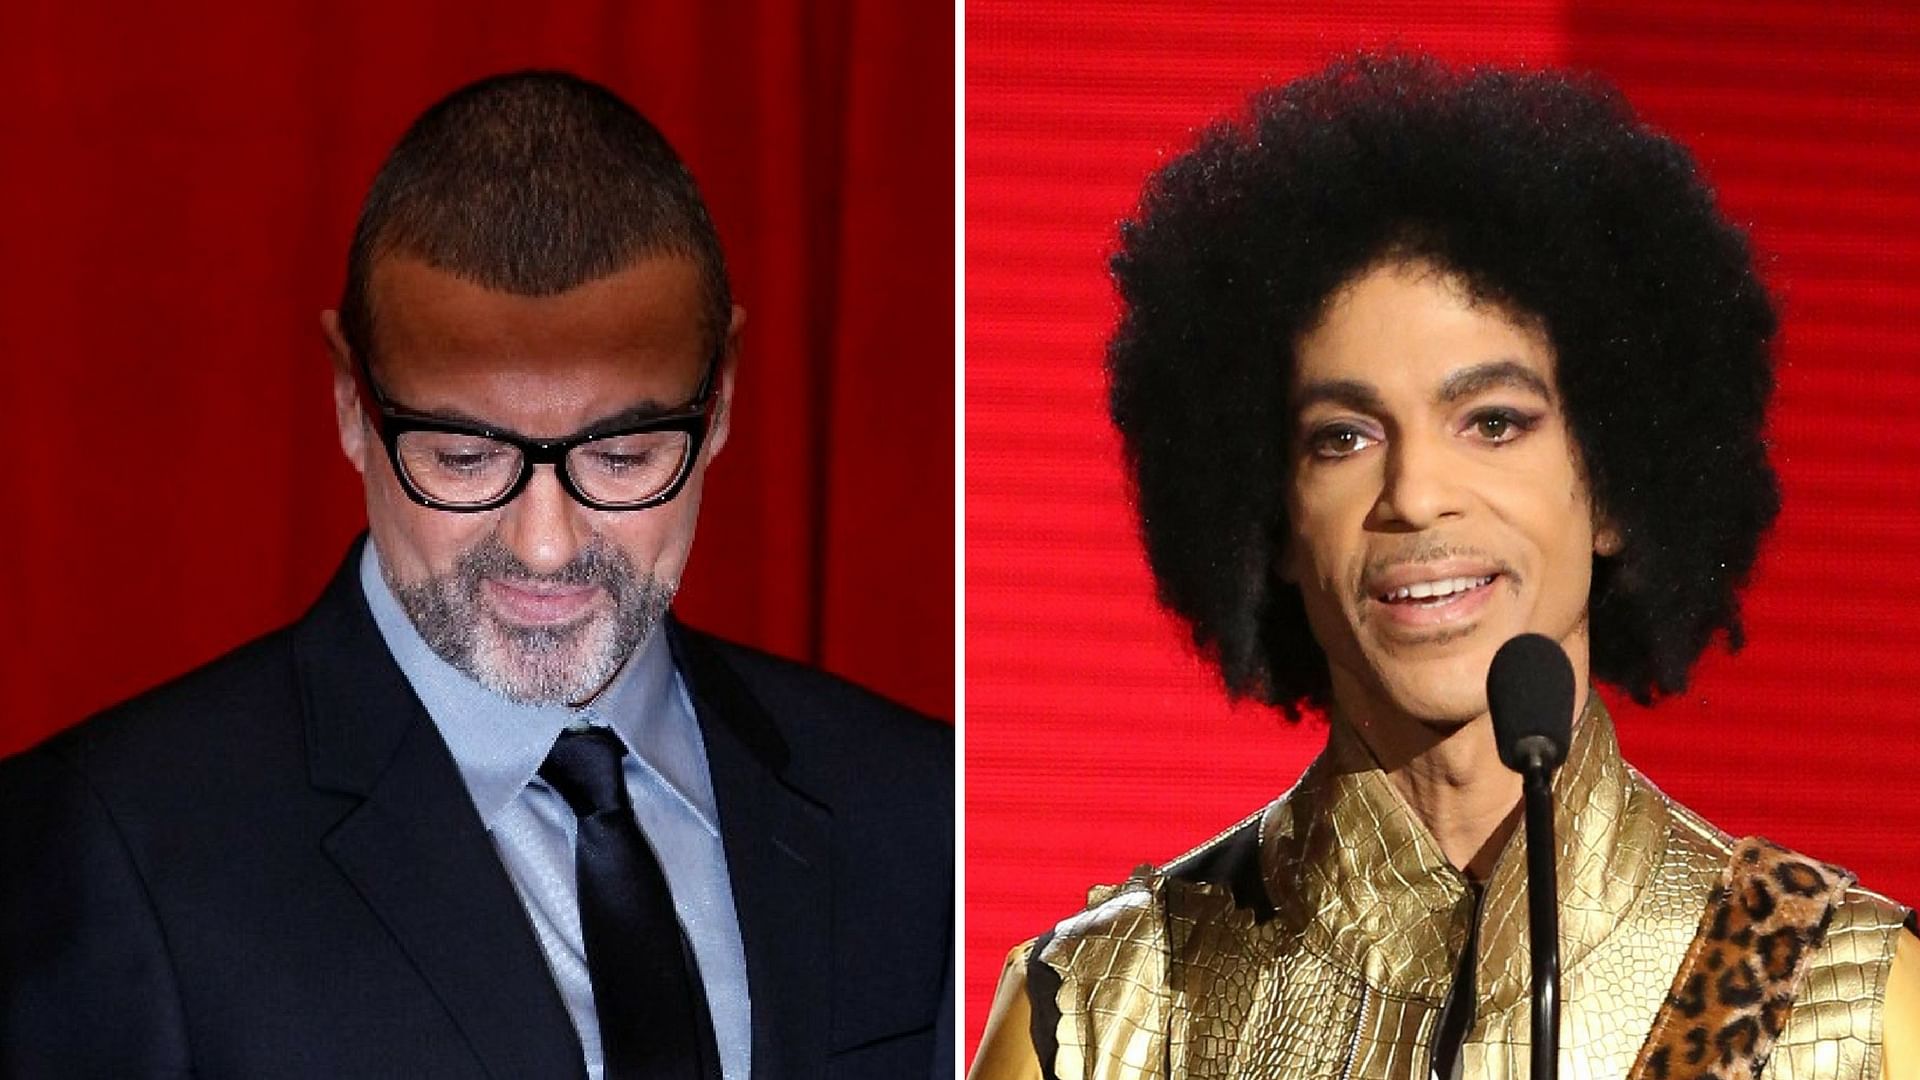 George Michael (left) and Prince (right). (Photo: Reuters/AP/The Quint)